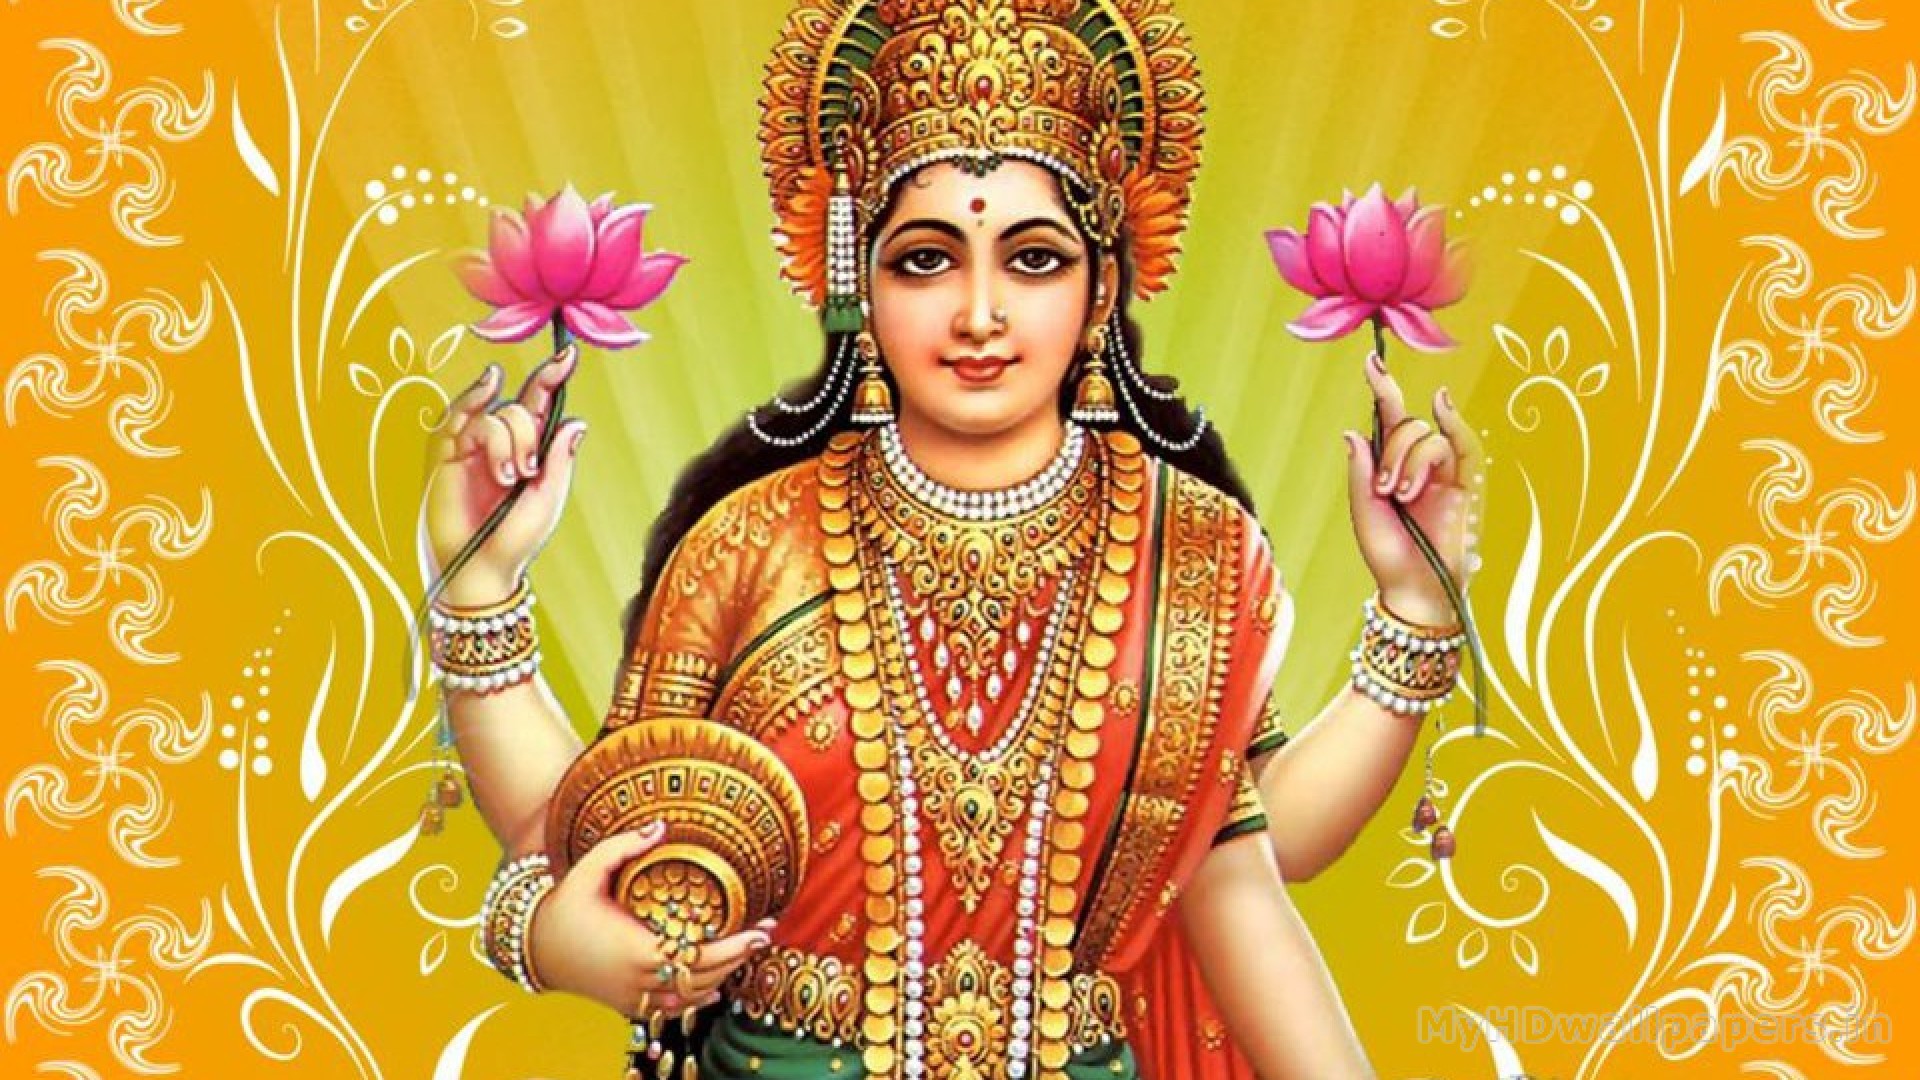 Hindu God HD Wallpapers Android Apps on Google Play 19201080 God Hd Wallpaper